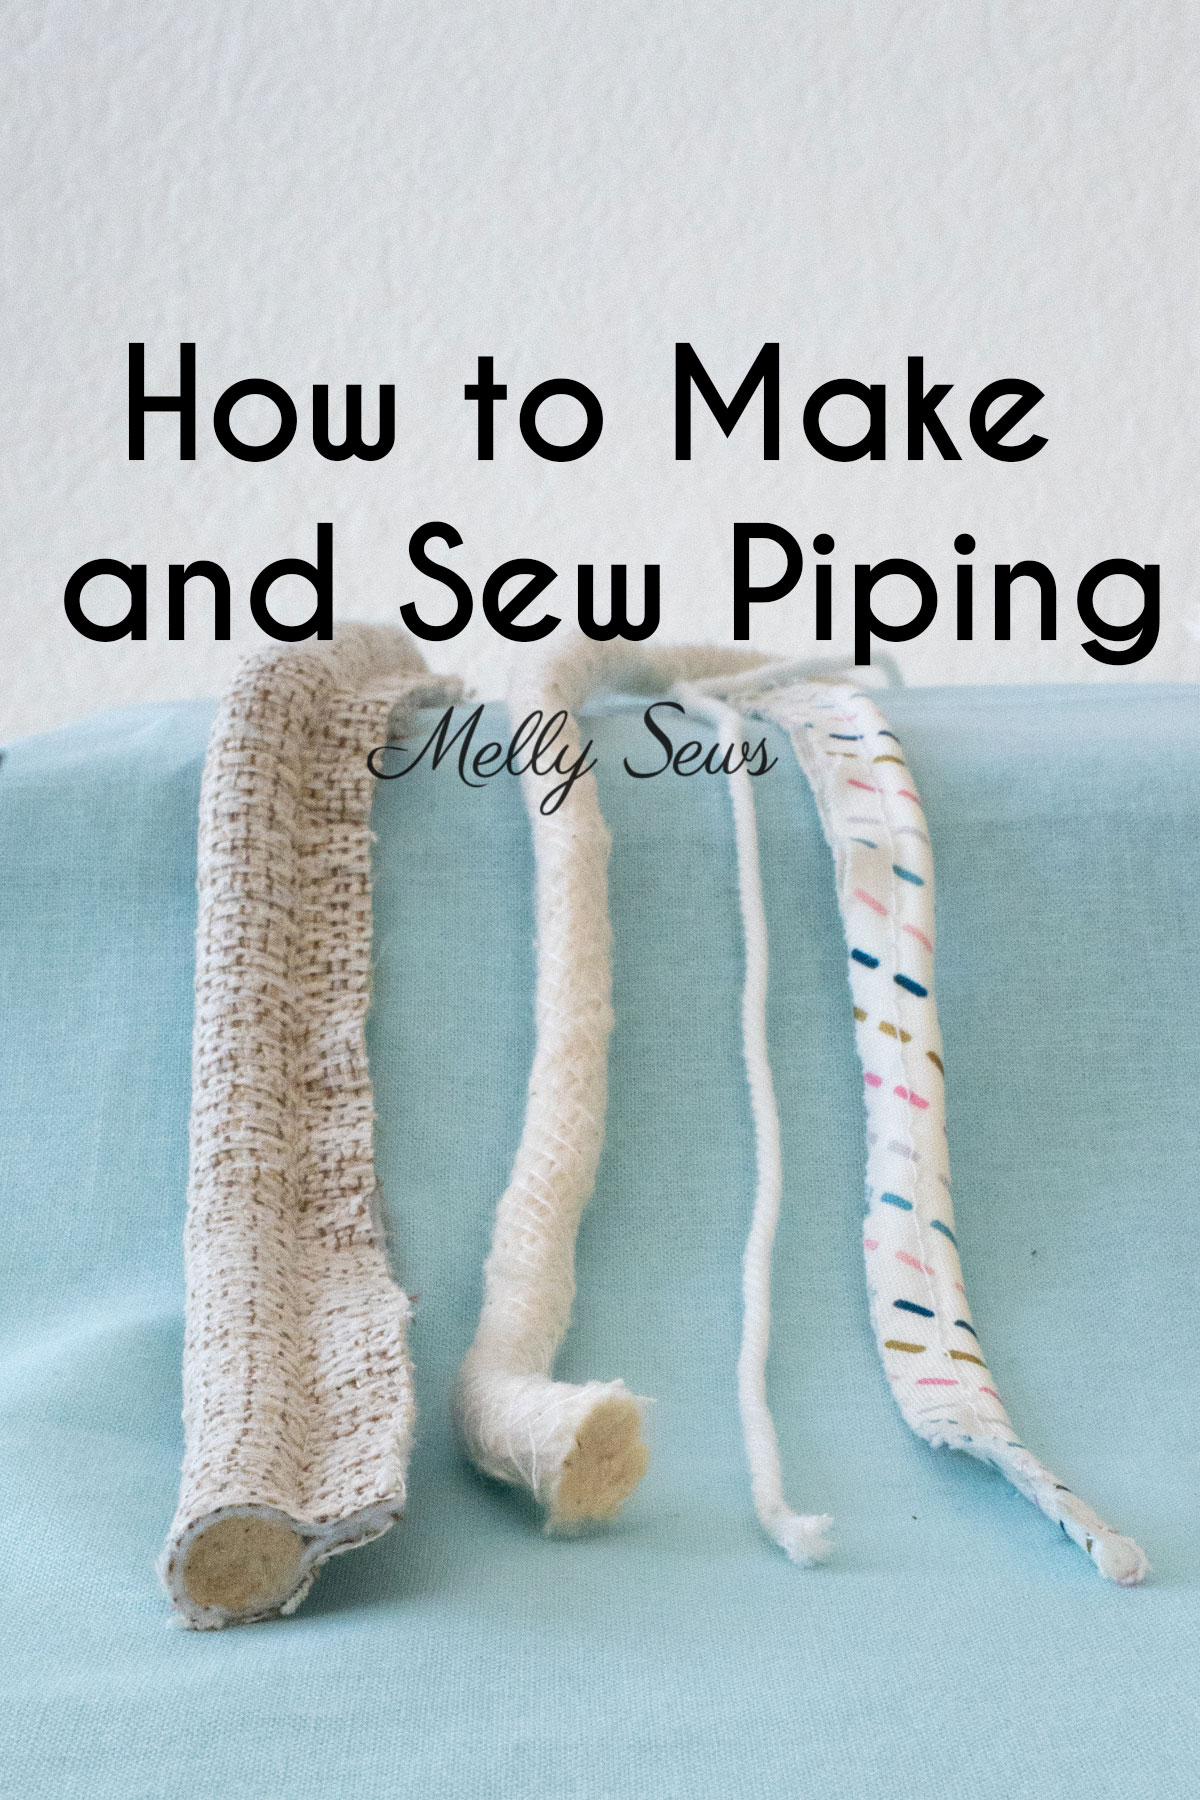 How to Sew Piping for Upholstery & Clothing - with Video - Melly Sews